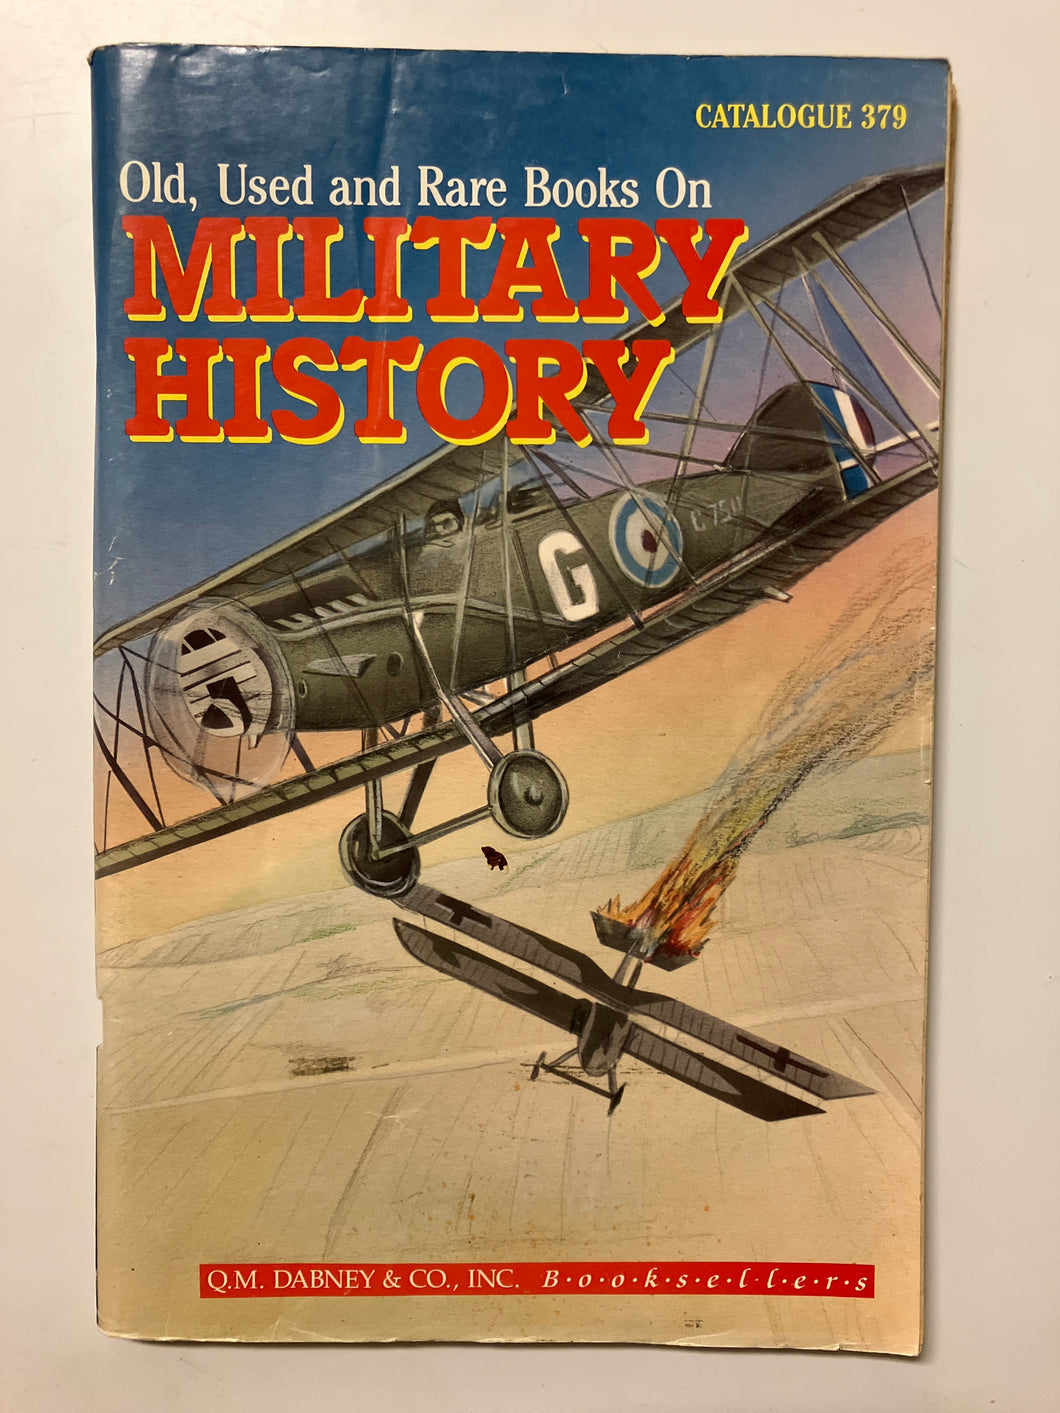 Old, Used and Rare Books on Military History Catalogue 379 – Slickcatbooks